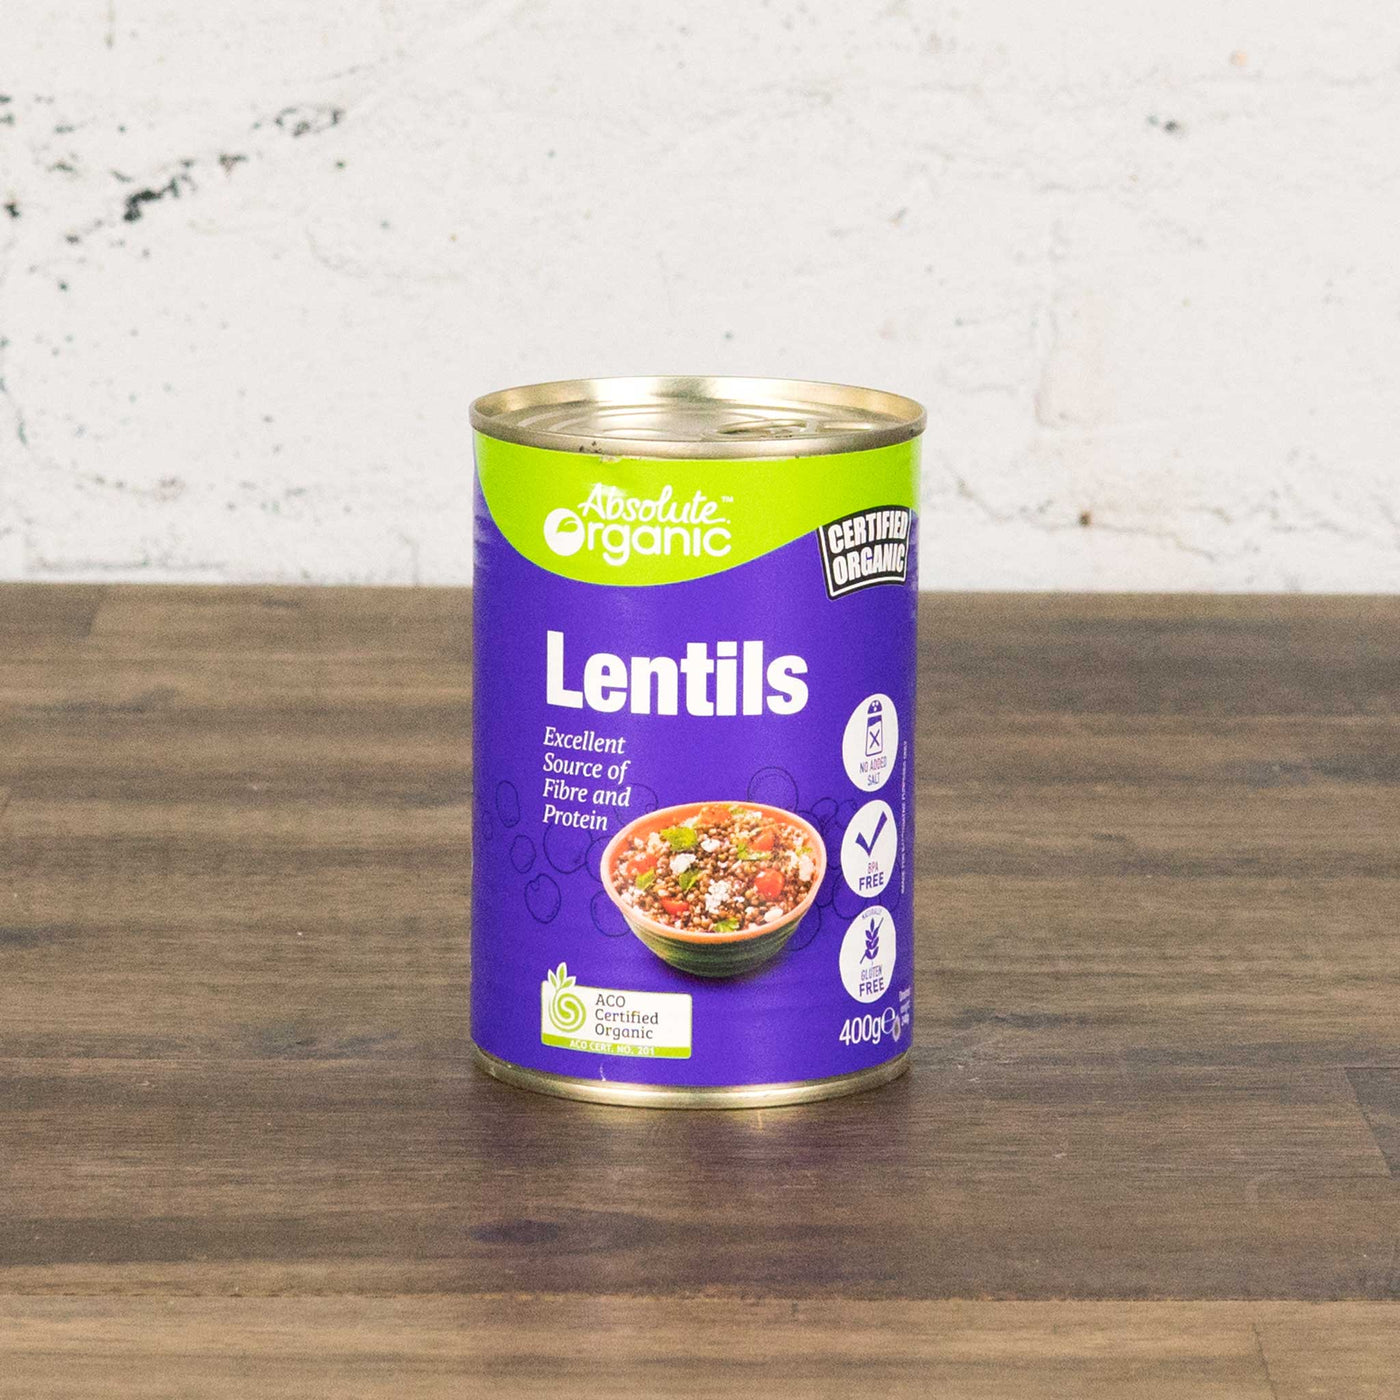 Absolute Organics Lentils Canned